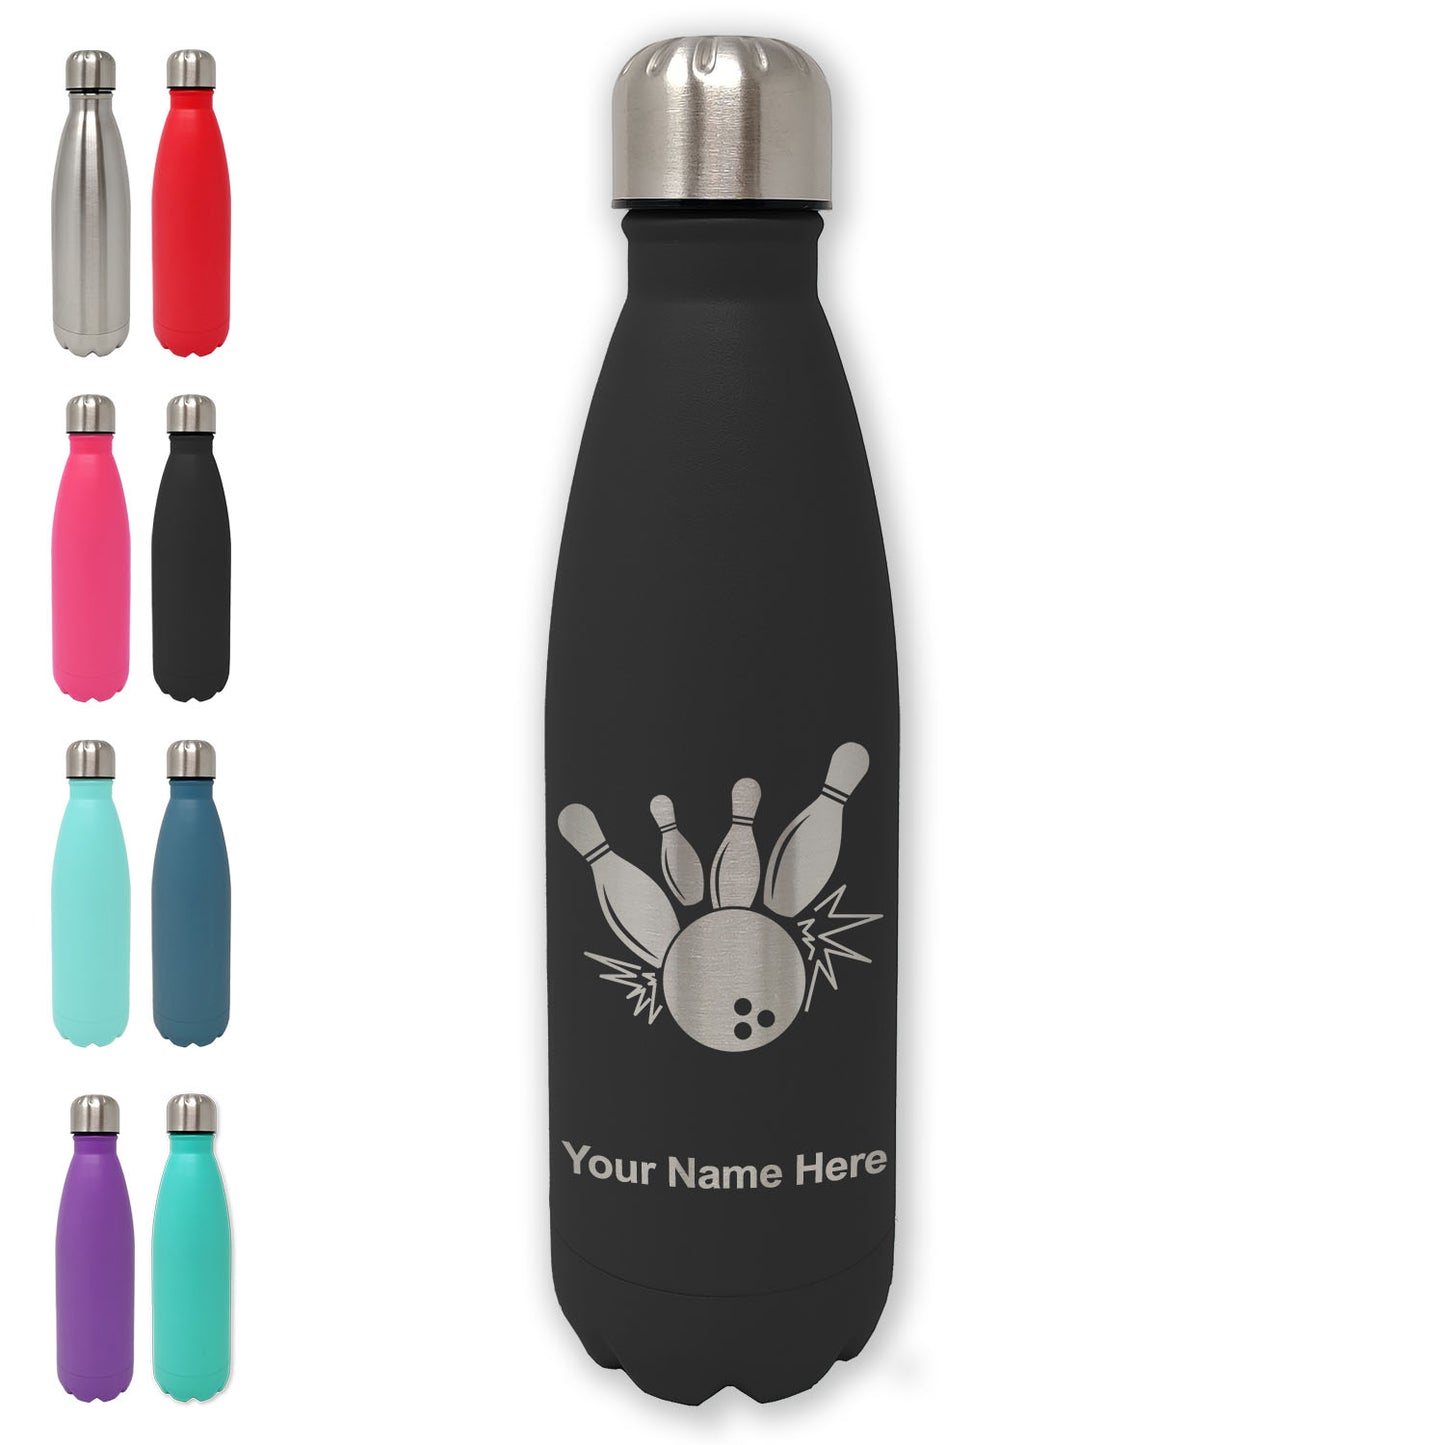 LaserGram Double Wall Water Bottle, Bowling Ball and Pins, Personalized Engraving Included